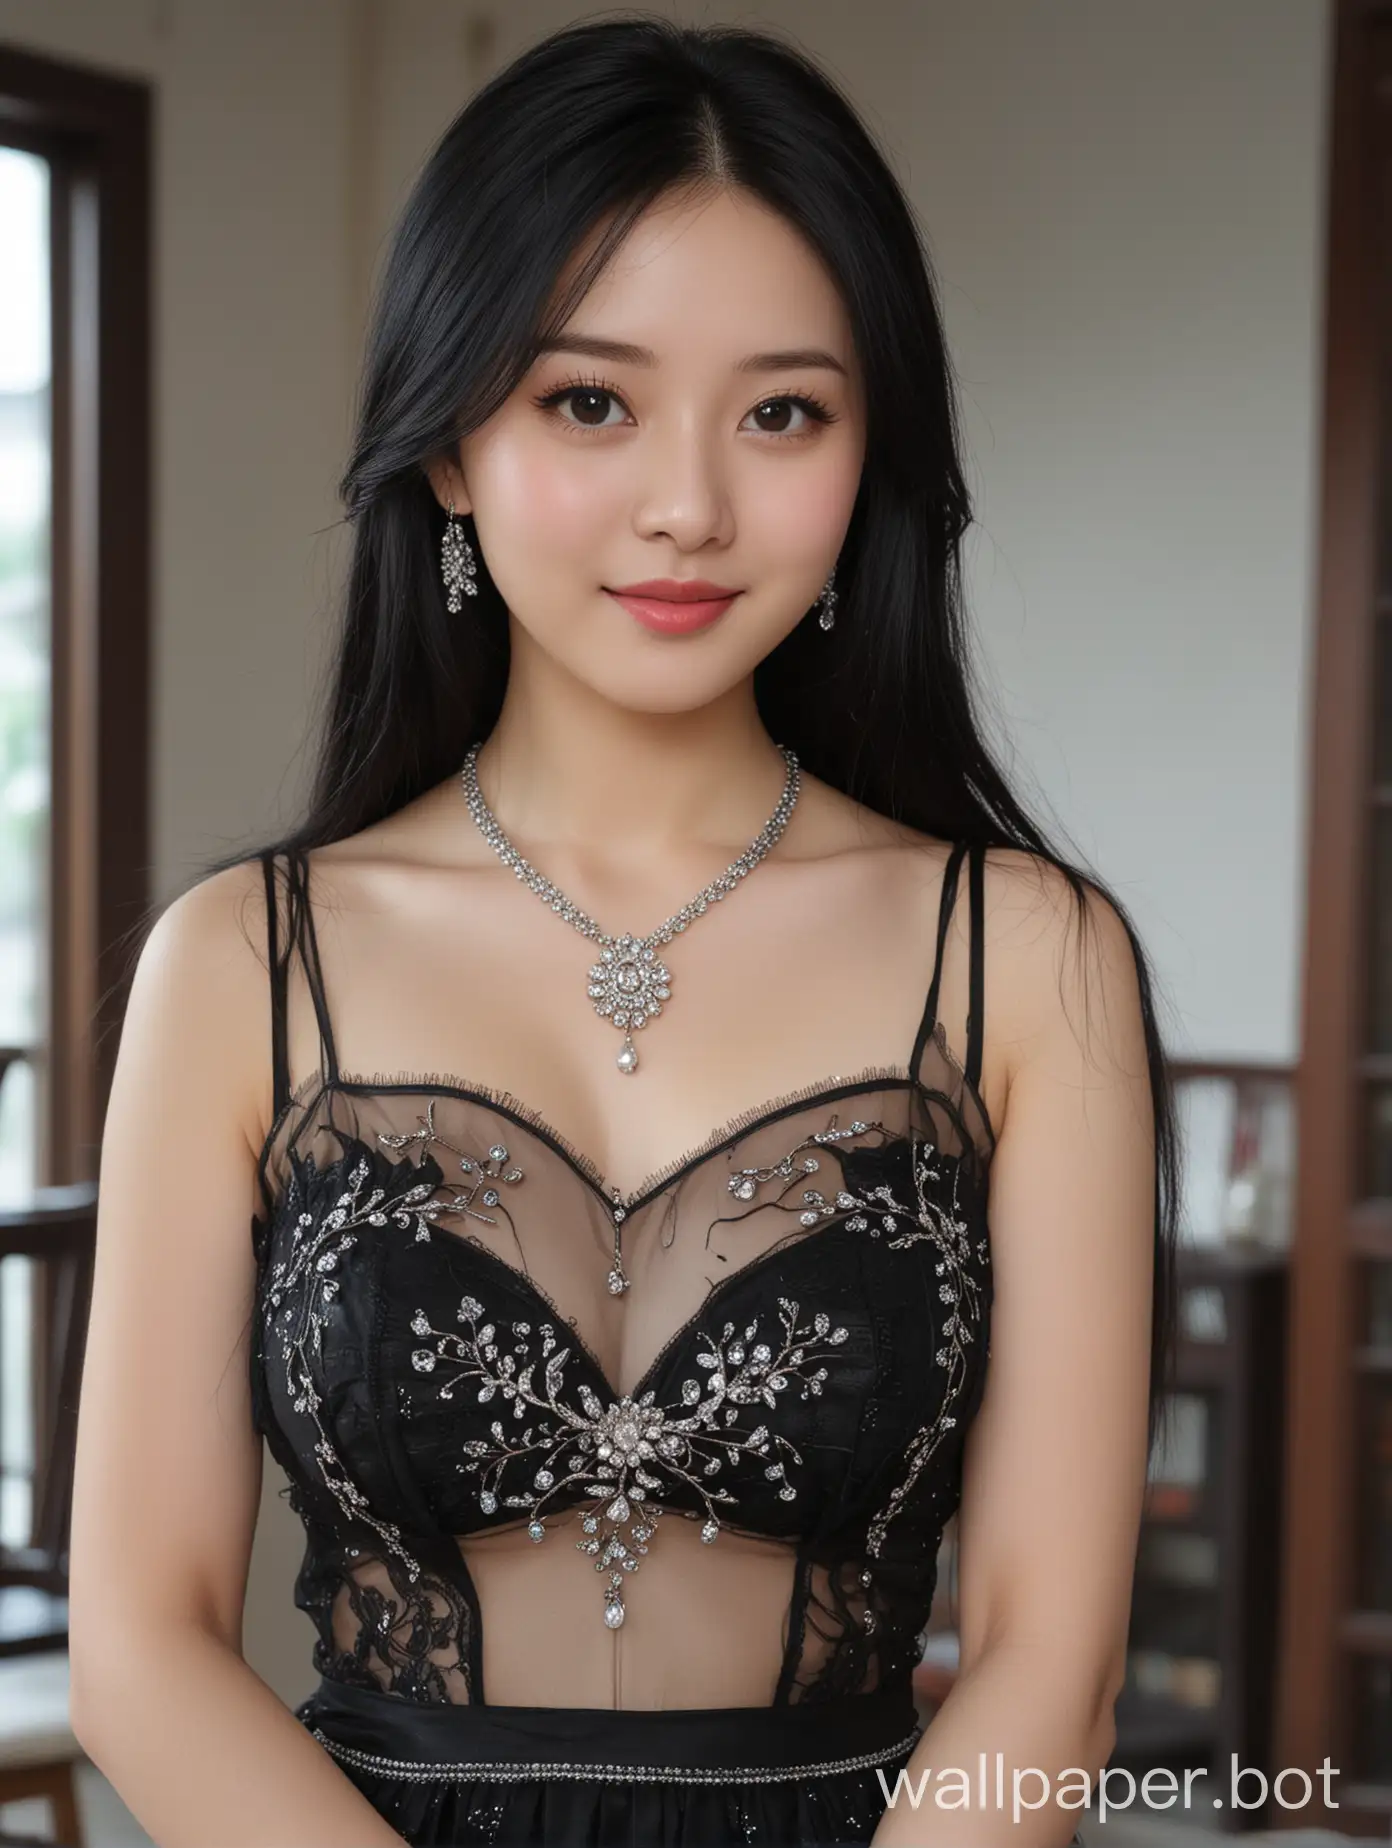 Generate an image of most beautiful (Chongqing Provinces China) actress big tits cute pretty girl 18 years old, A-line Dress Transparent, with a fair skin tone and long black hair. She has a round smiling face. The background is a modern house interior. The camera shot captures her from head to stomach. She is wearing makeup and has a necklace, jhumka earring, and bracelet on.